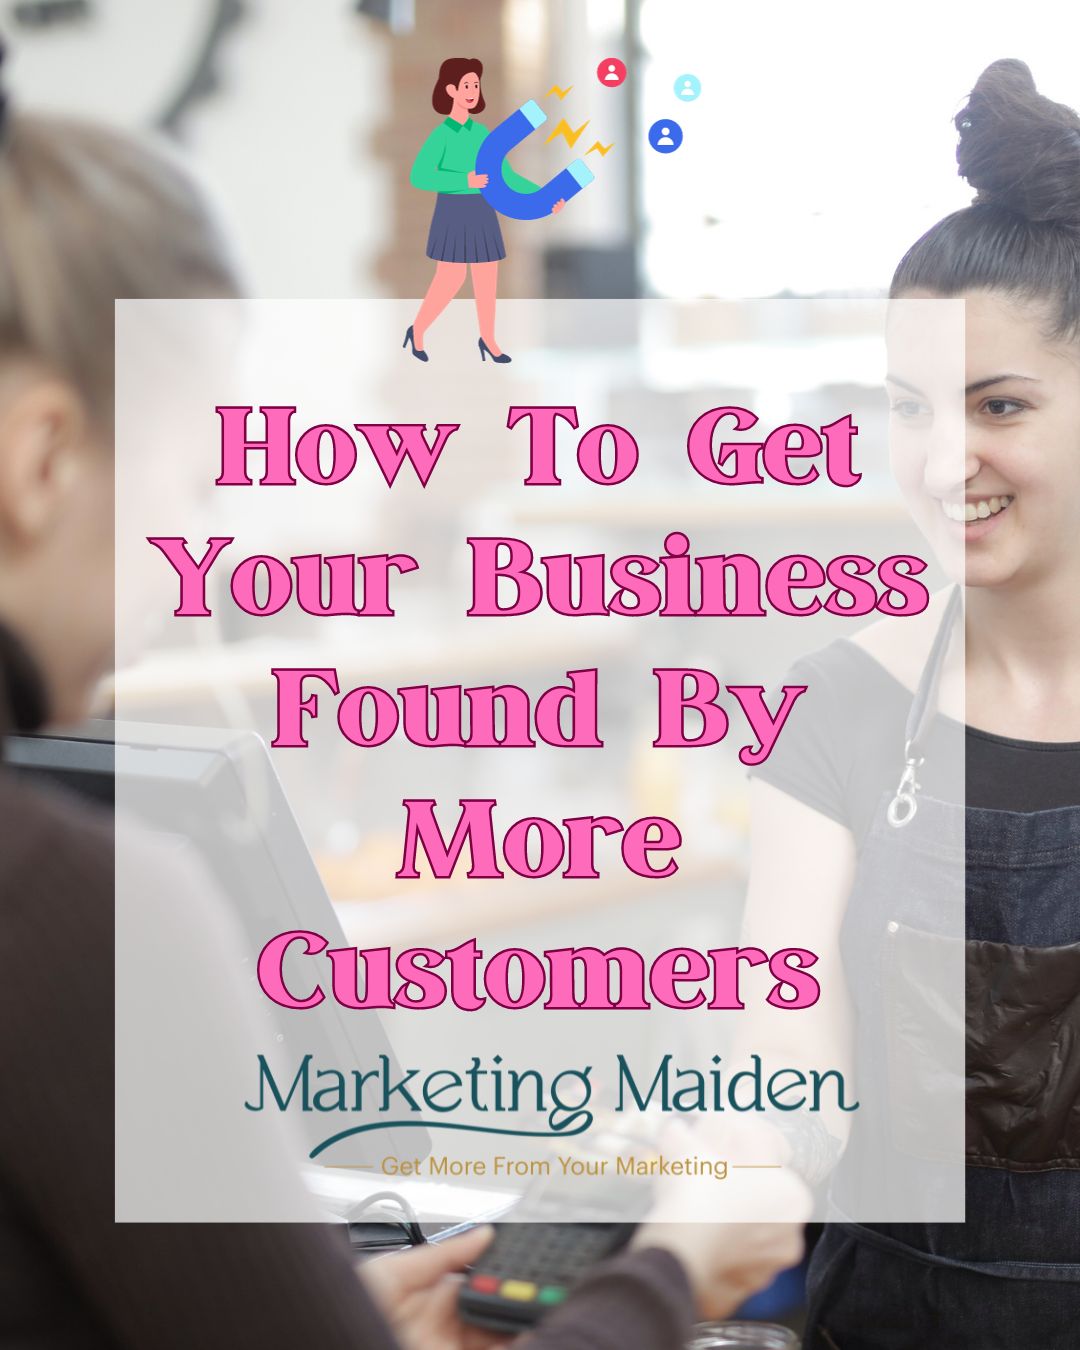 How To Get Your Business Found By More Customers